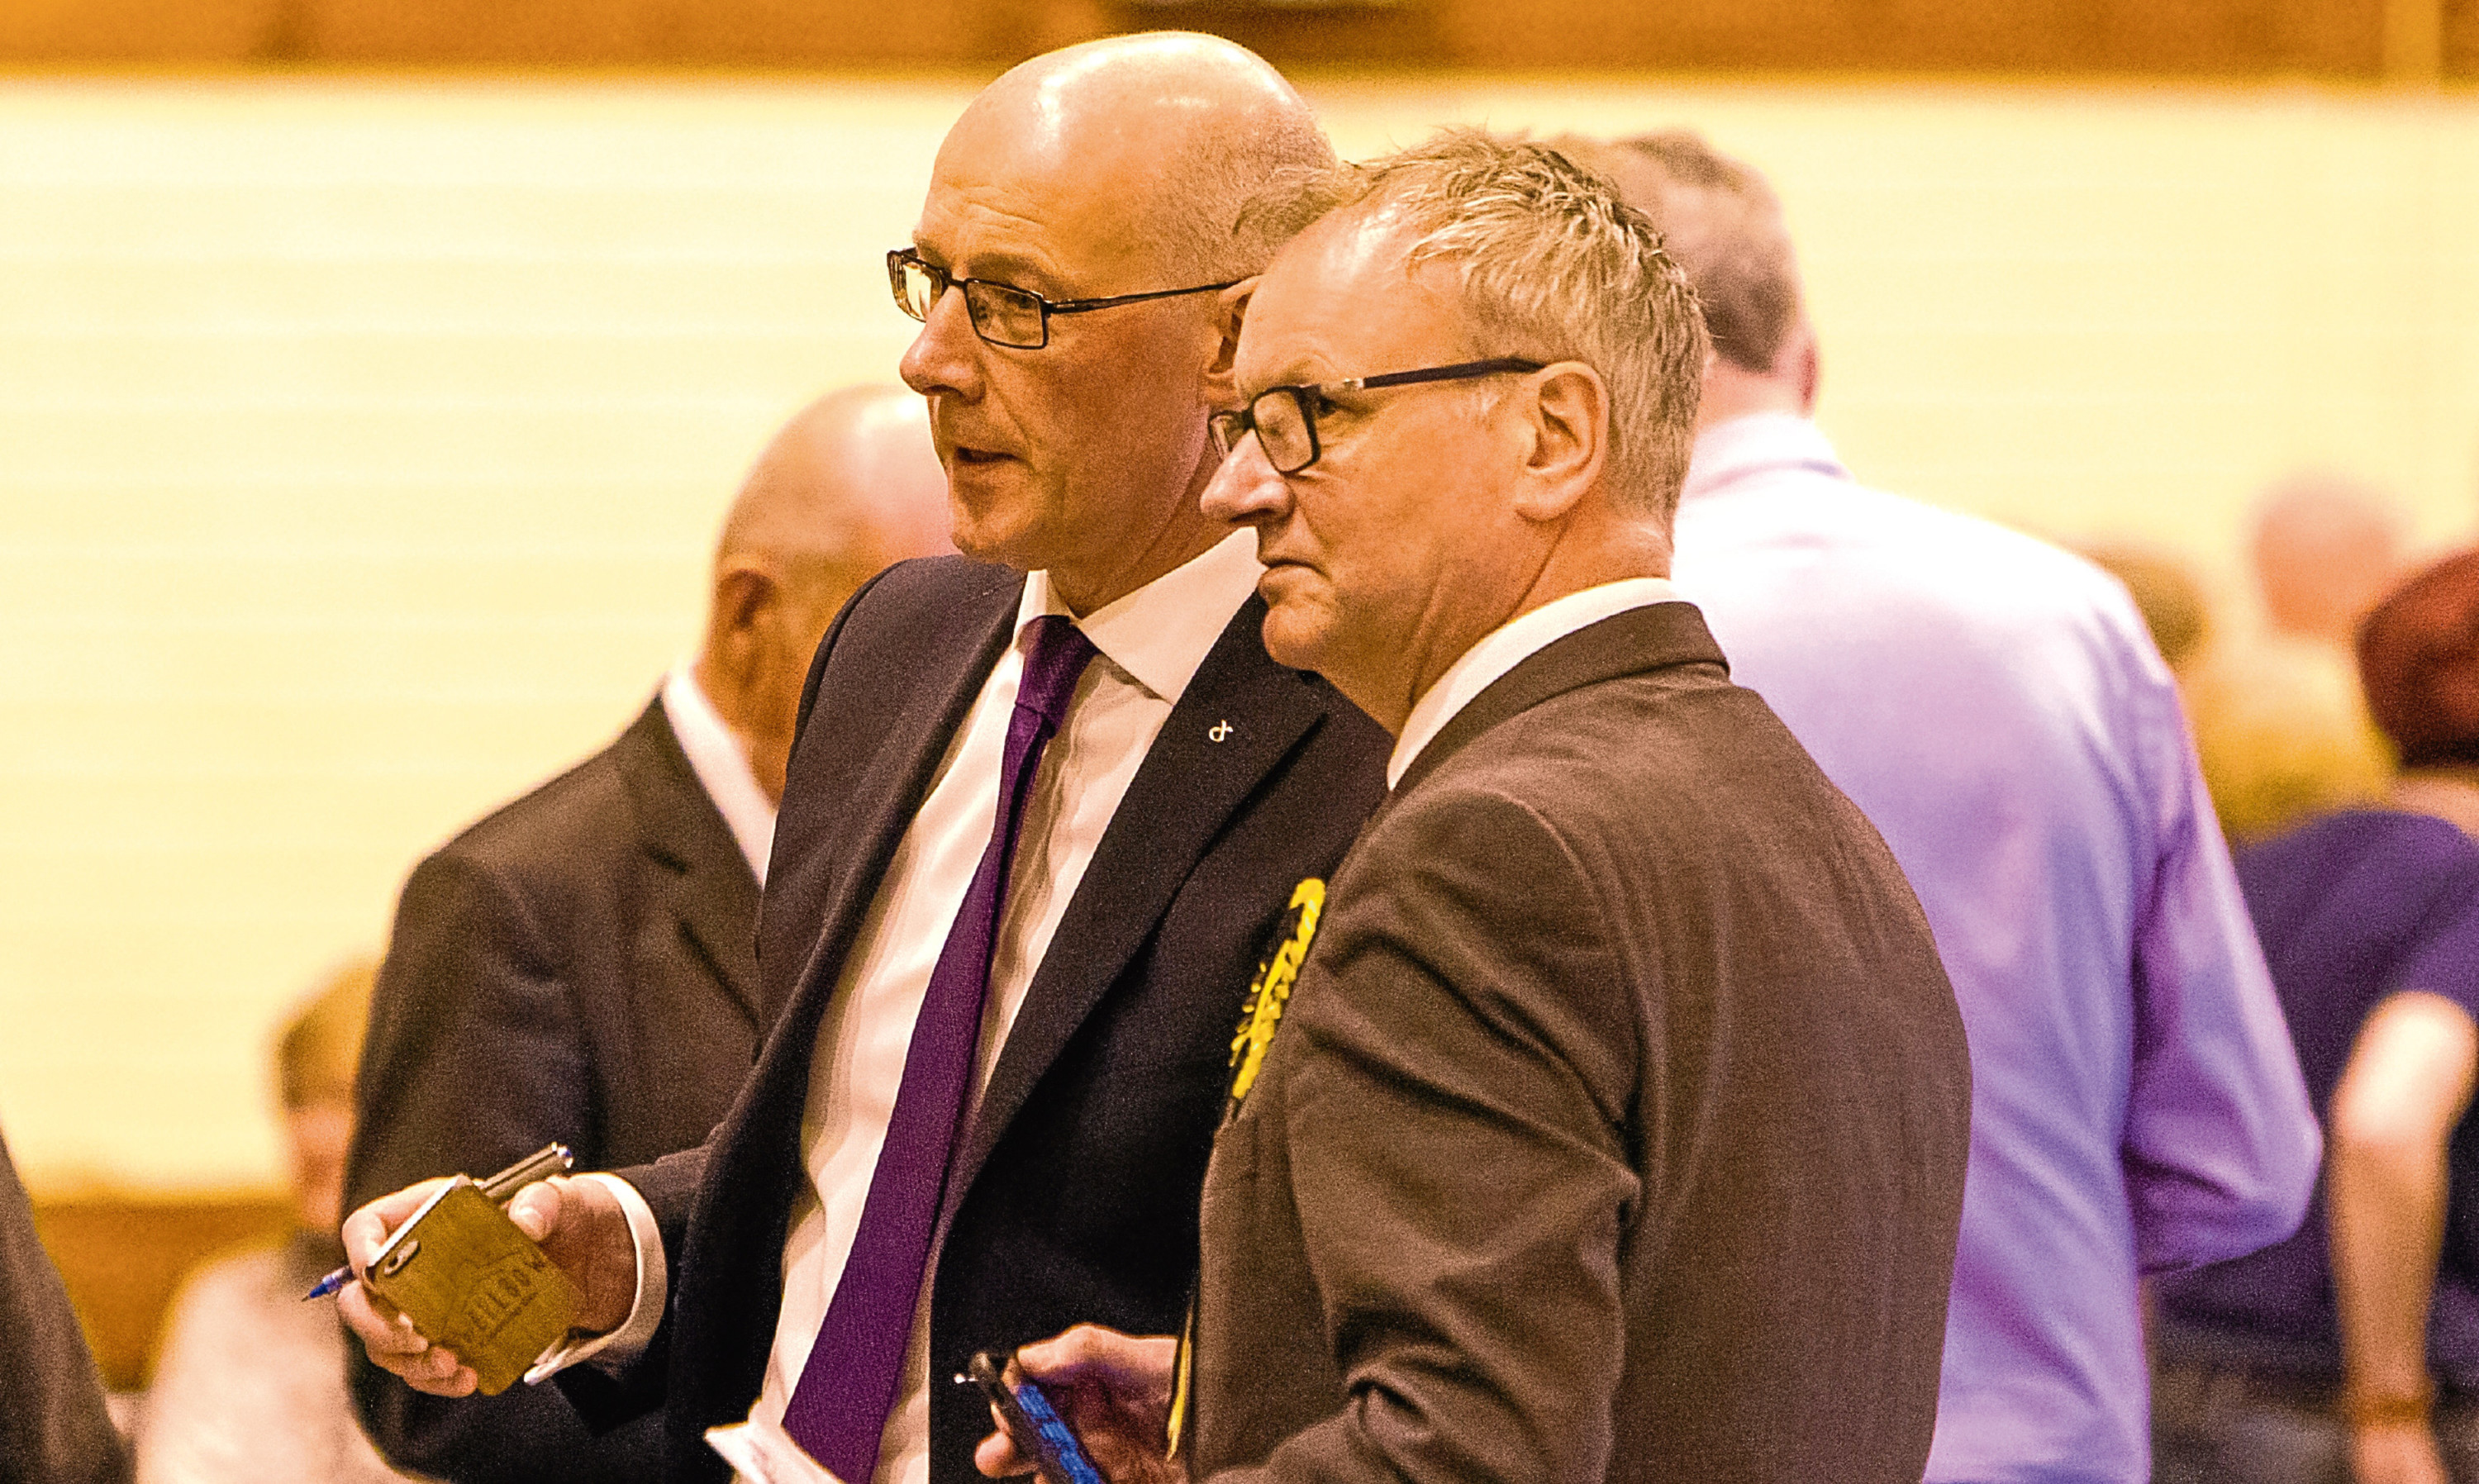 Pete Wishart, right, pictured with John Swinney at the local election count in Perth, is one SNP MP whose seat could be vulnerable in the general election.